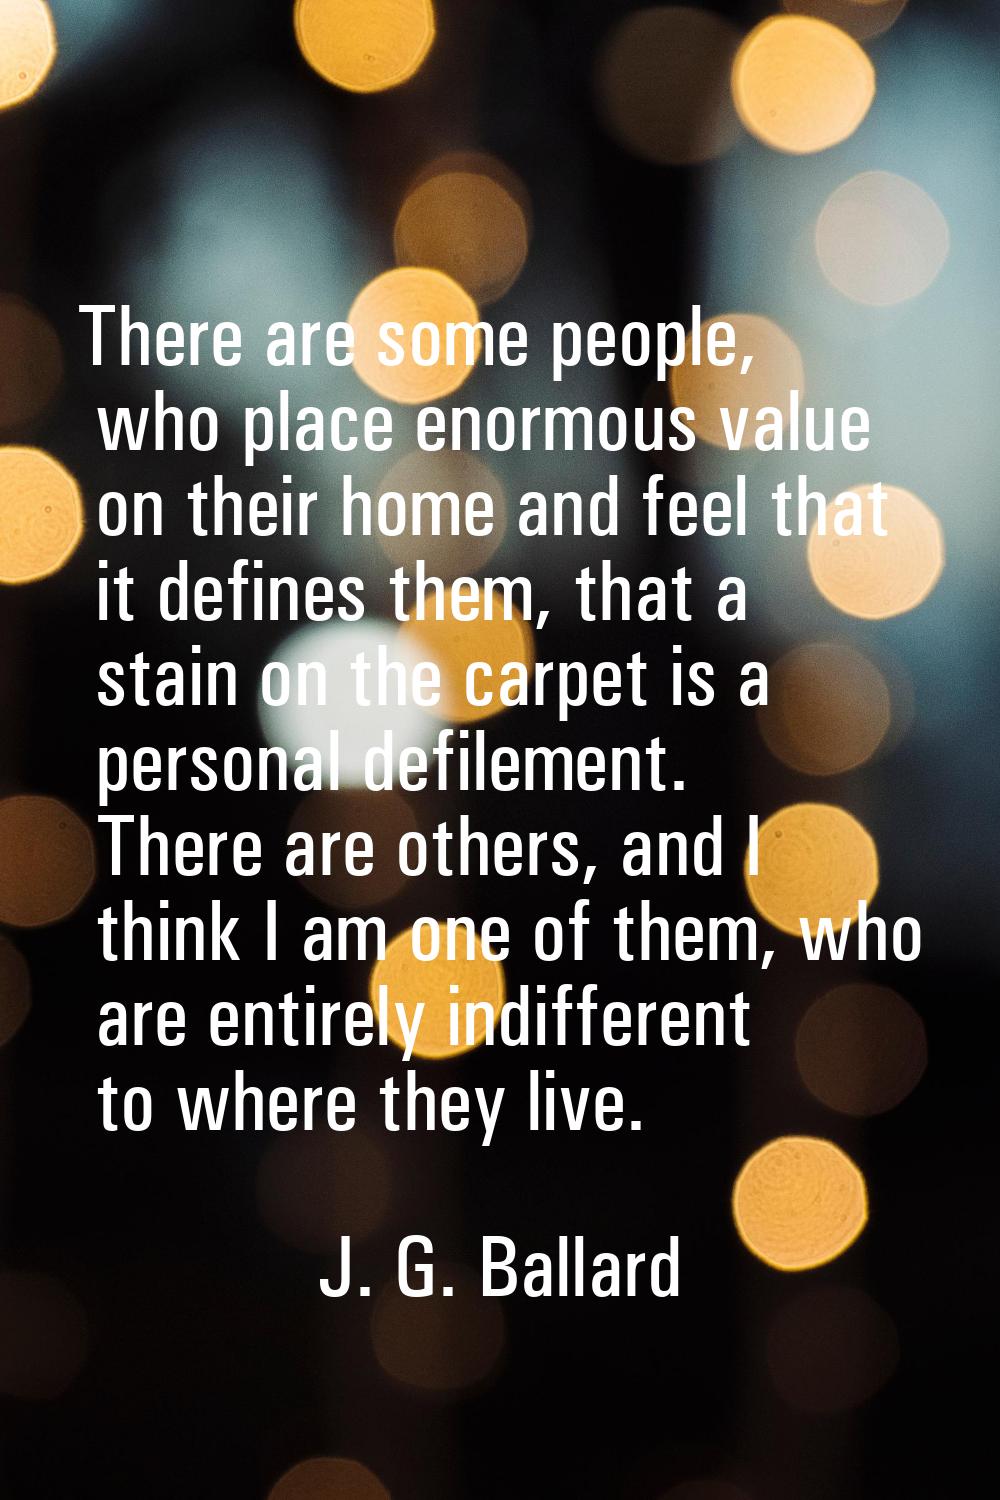 There are some people, who place enormous value on their home and feel that it defines them, that a